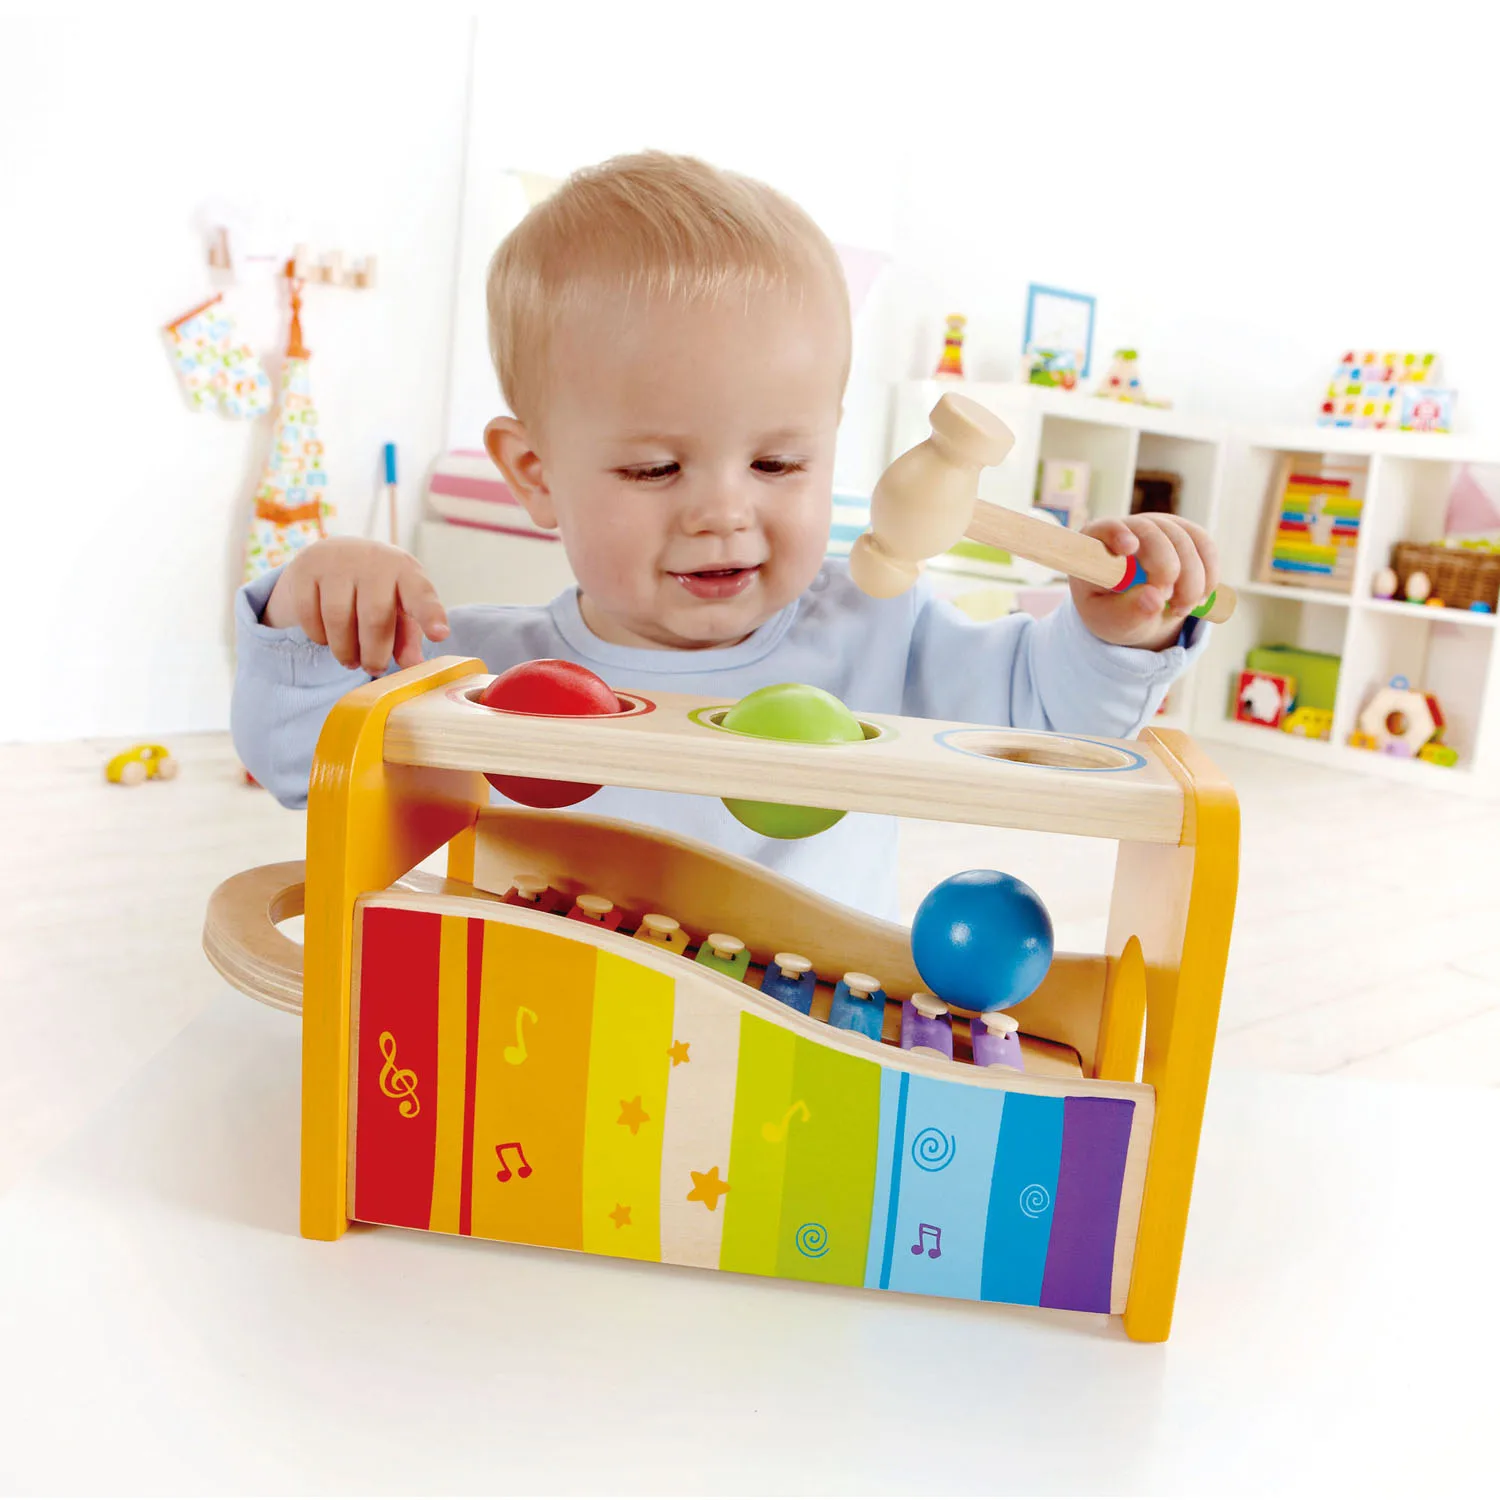 Hot sale high quality water based paint eco-friendly popular kids wooden toy